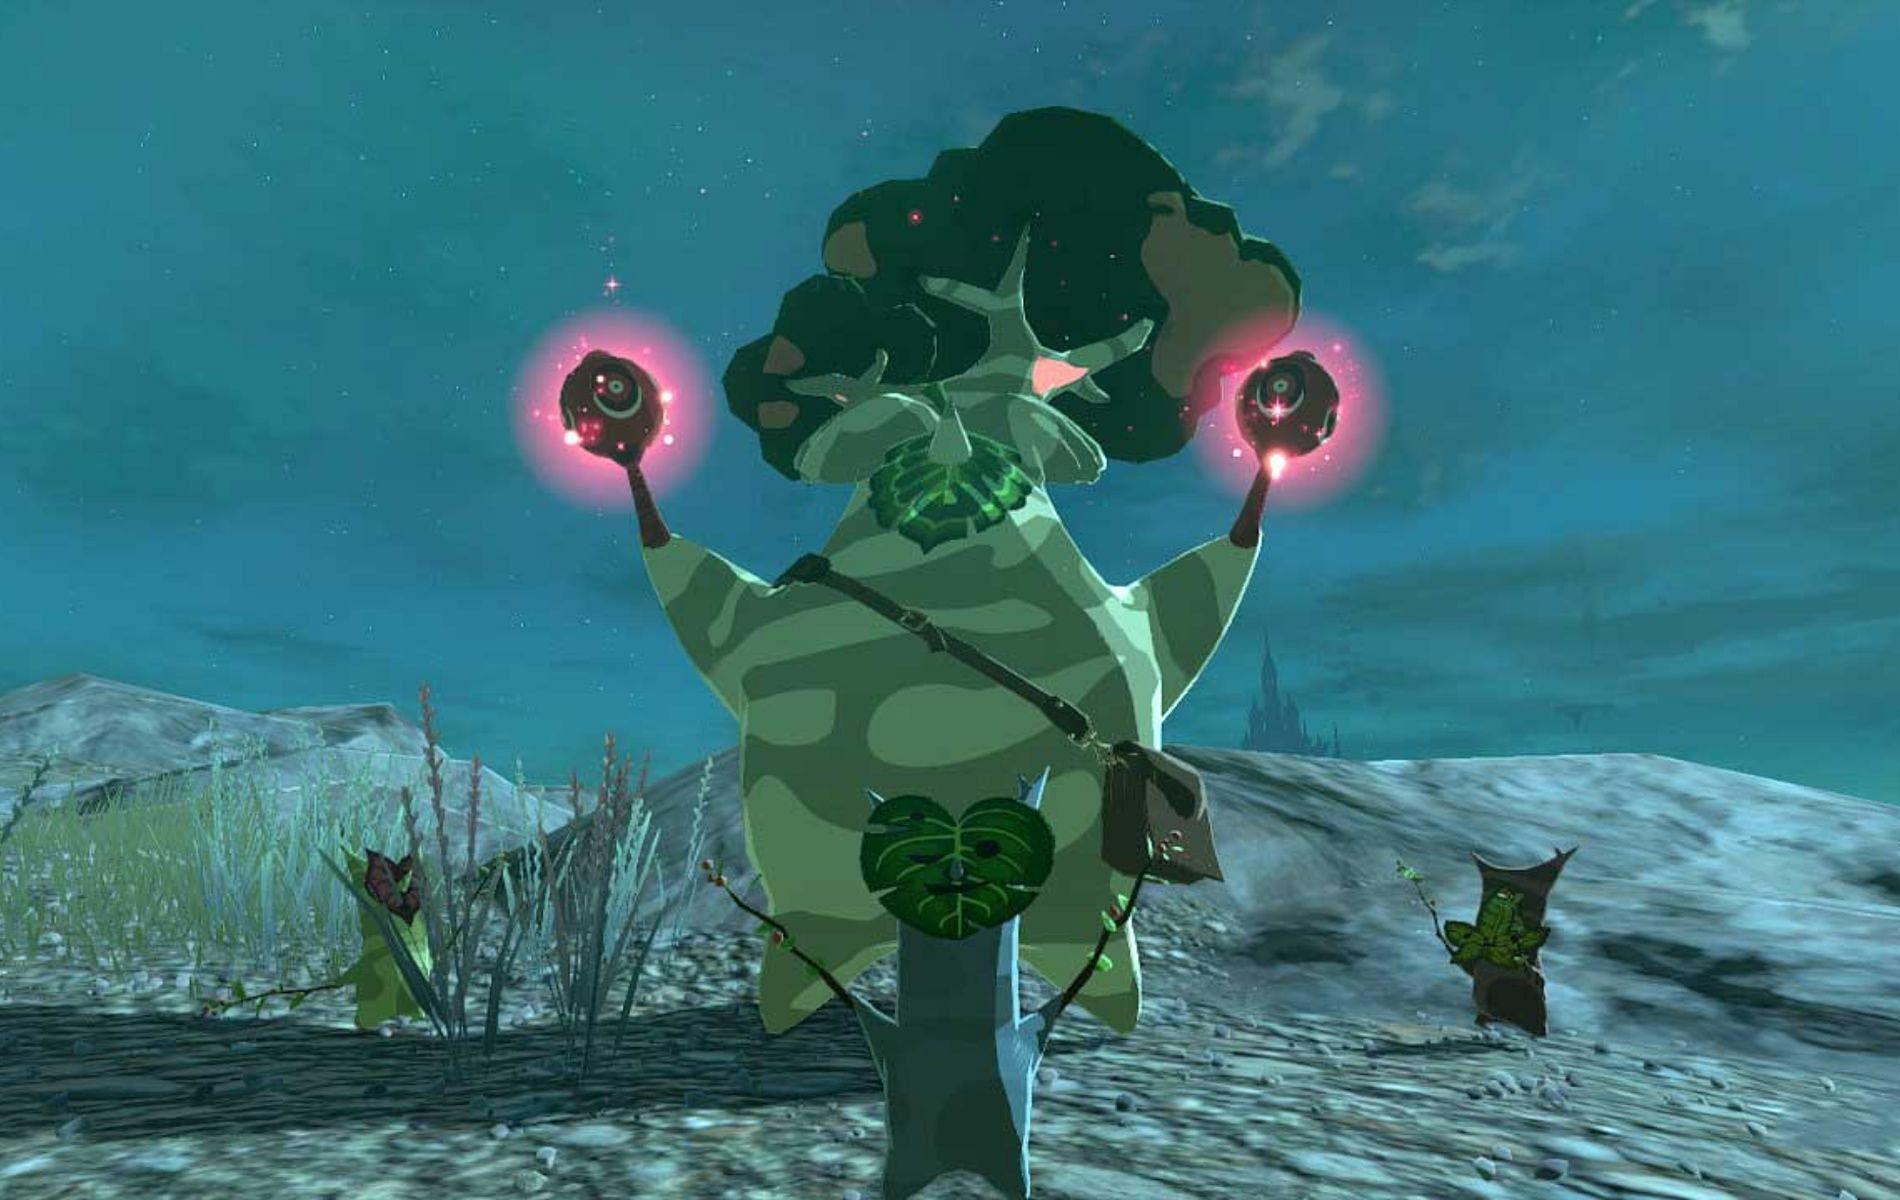 Using the Duplication Glitch to get infinite items in The Legend of Zelda Tears of the Kingdom (image via Nintendo)